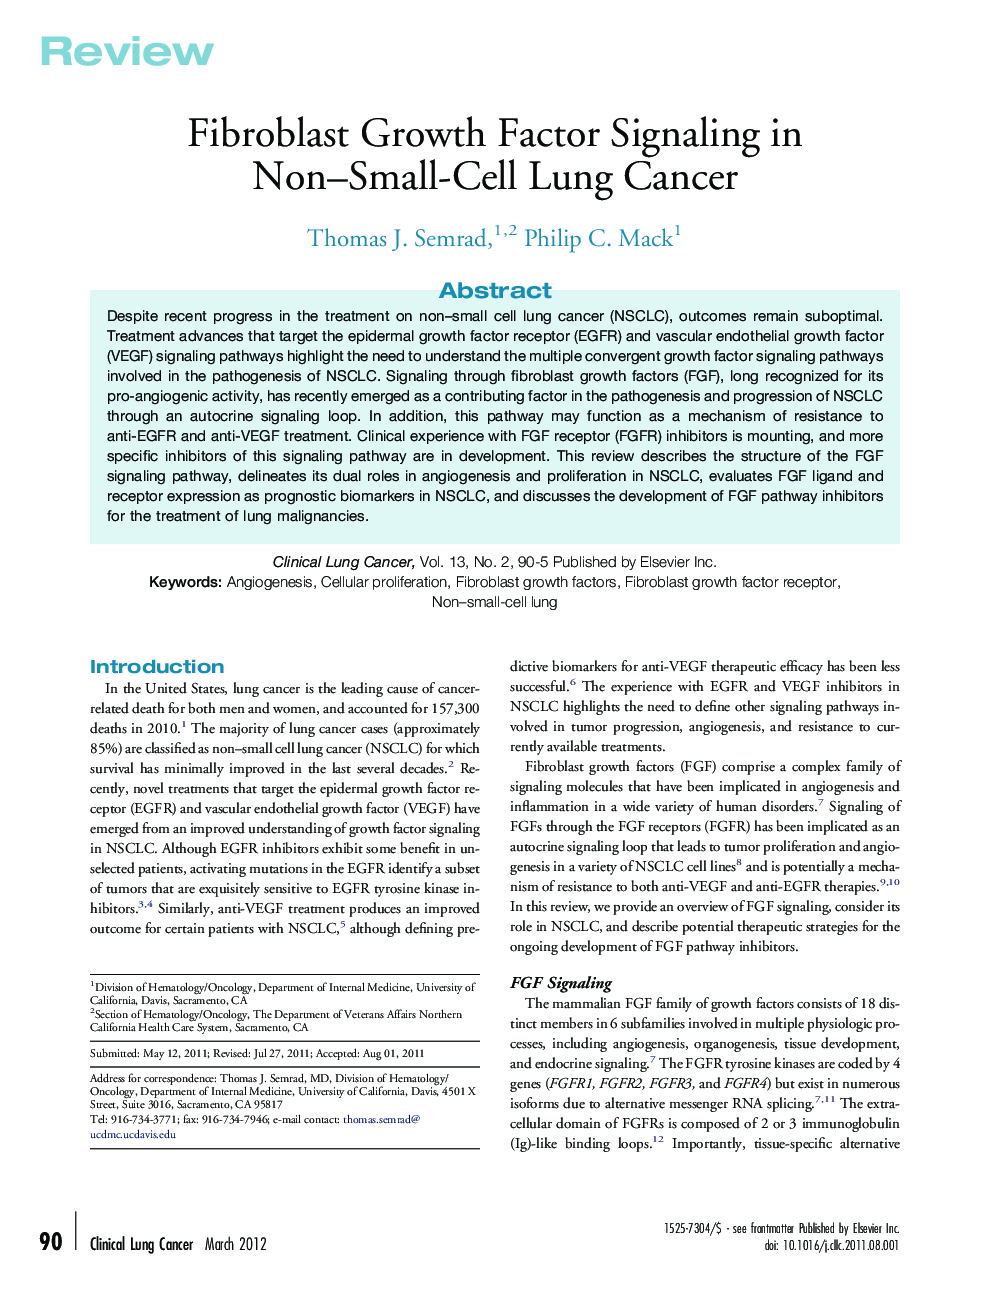 Fibroblast Growth Factor Signaling in Non–Small-Cell Lung Cancer